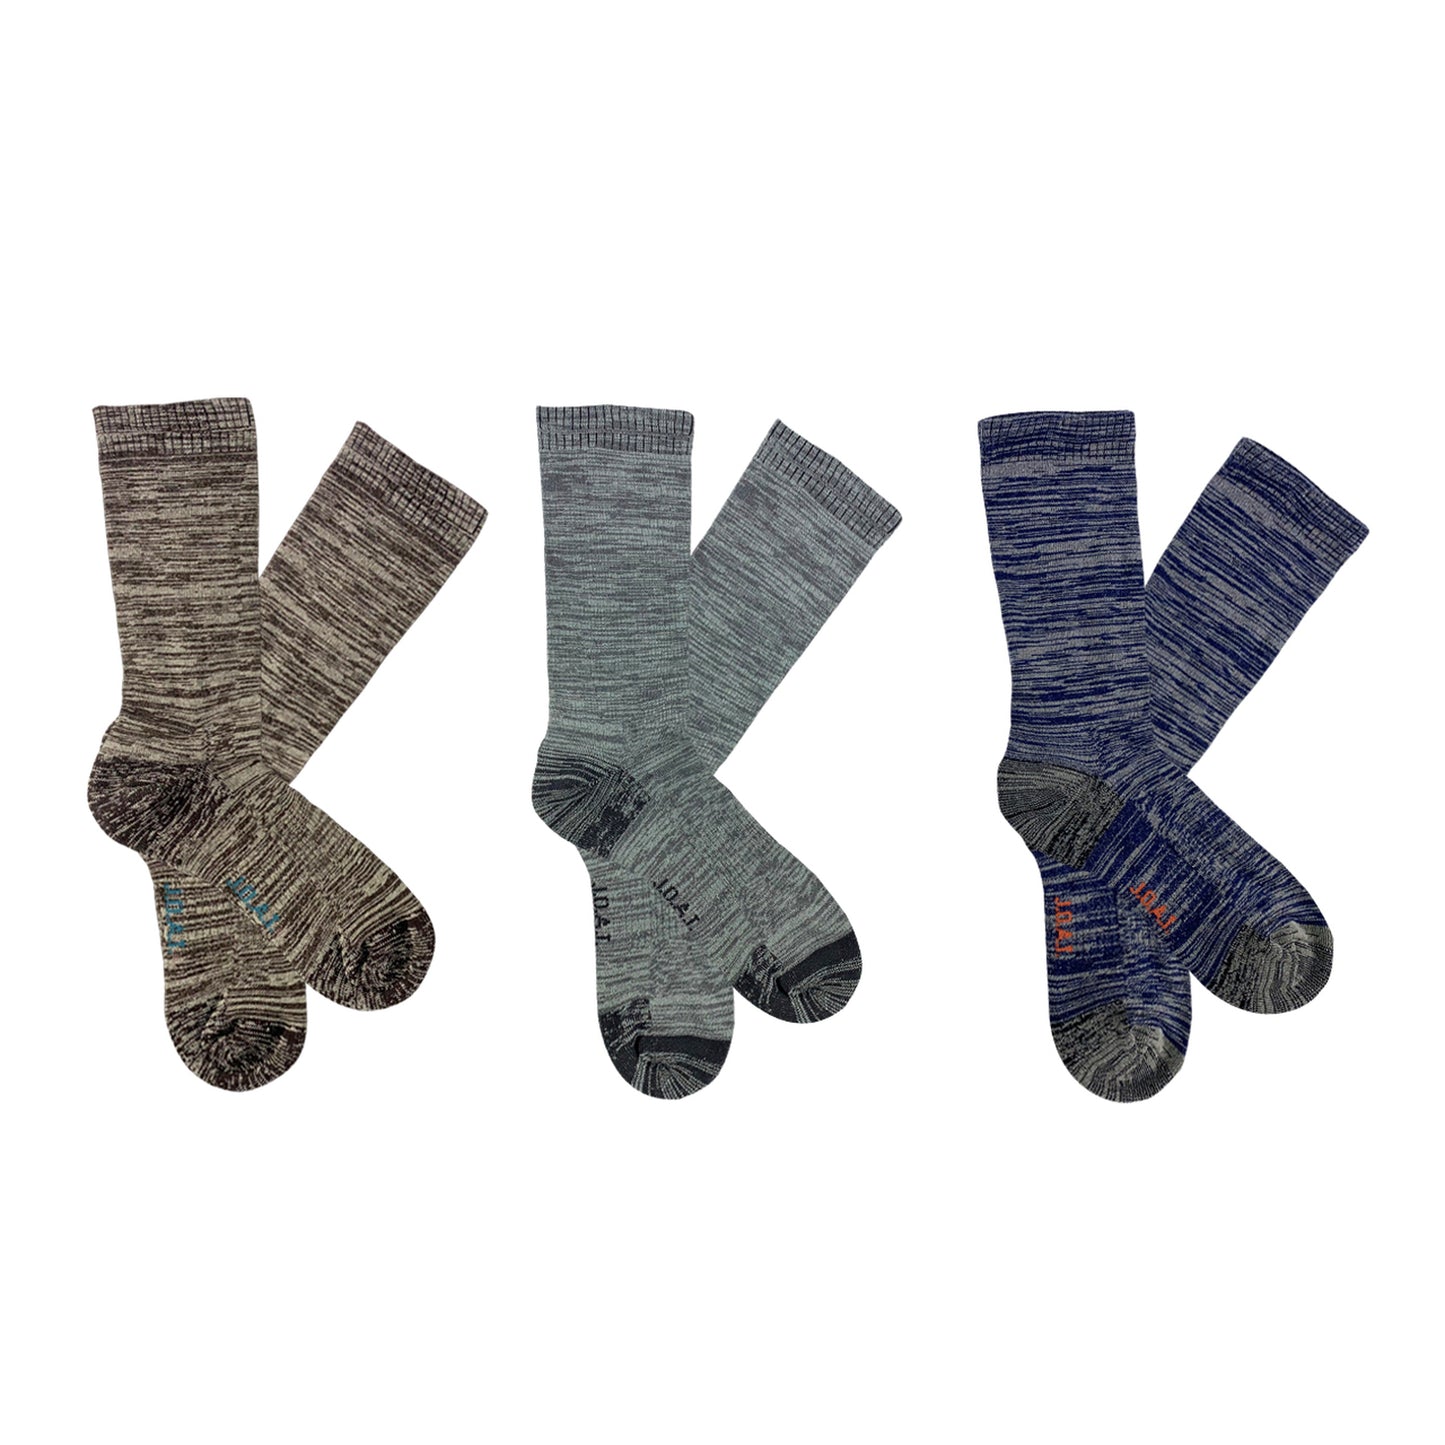 The Jack of all trades® Top to Toe Comfort socks Pk3 is a sock designed to be comfortable from top to toe. Comfort, Support and durability is maximised, at exceptional value. Features Loose top for health circulation, arch support and reinforced heel and toe. Pack of 3 space dyed socks coloured one each of brown, grey and navy.